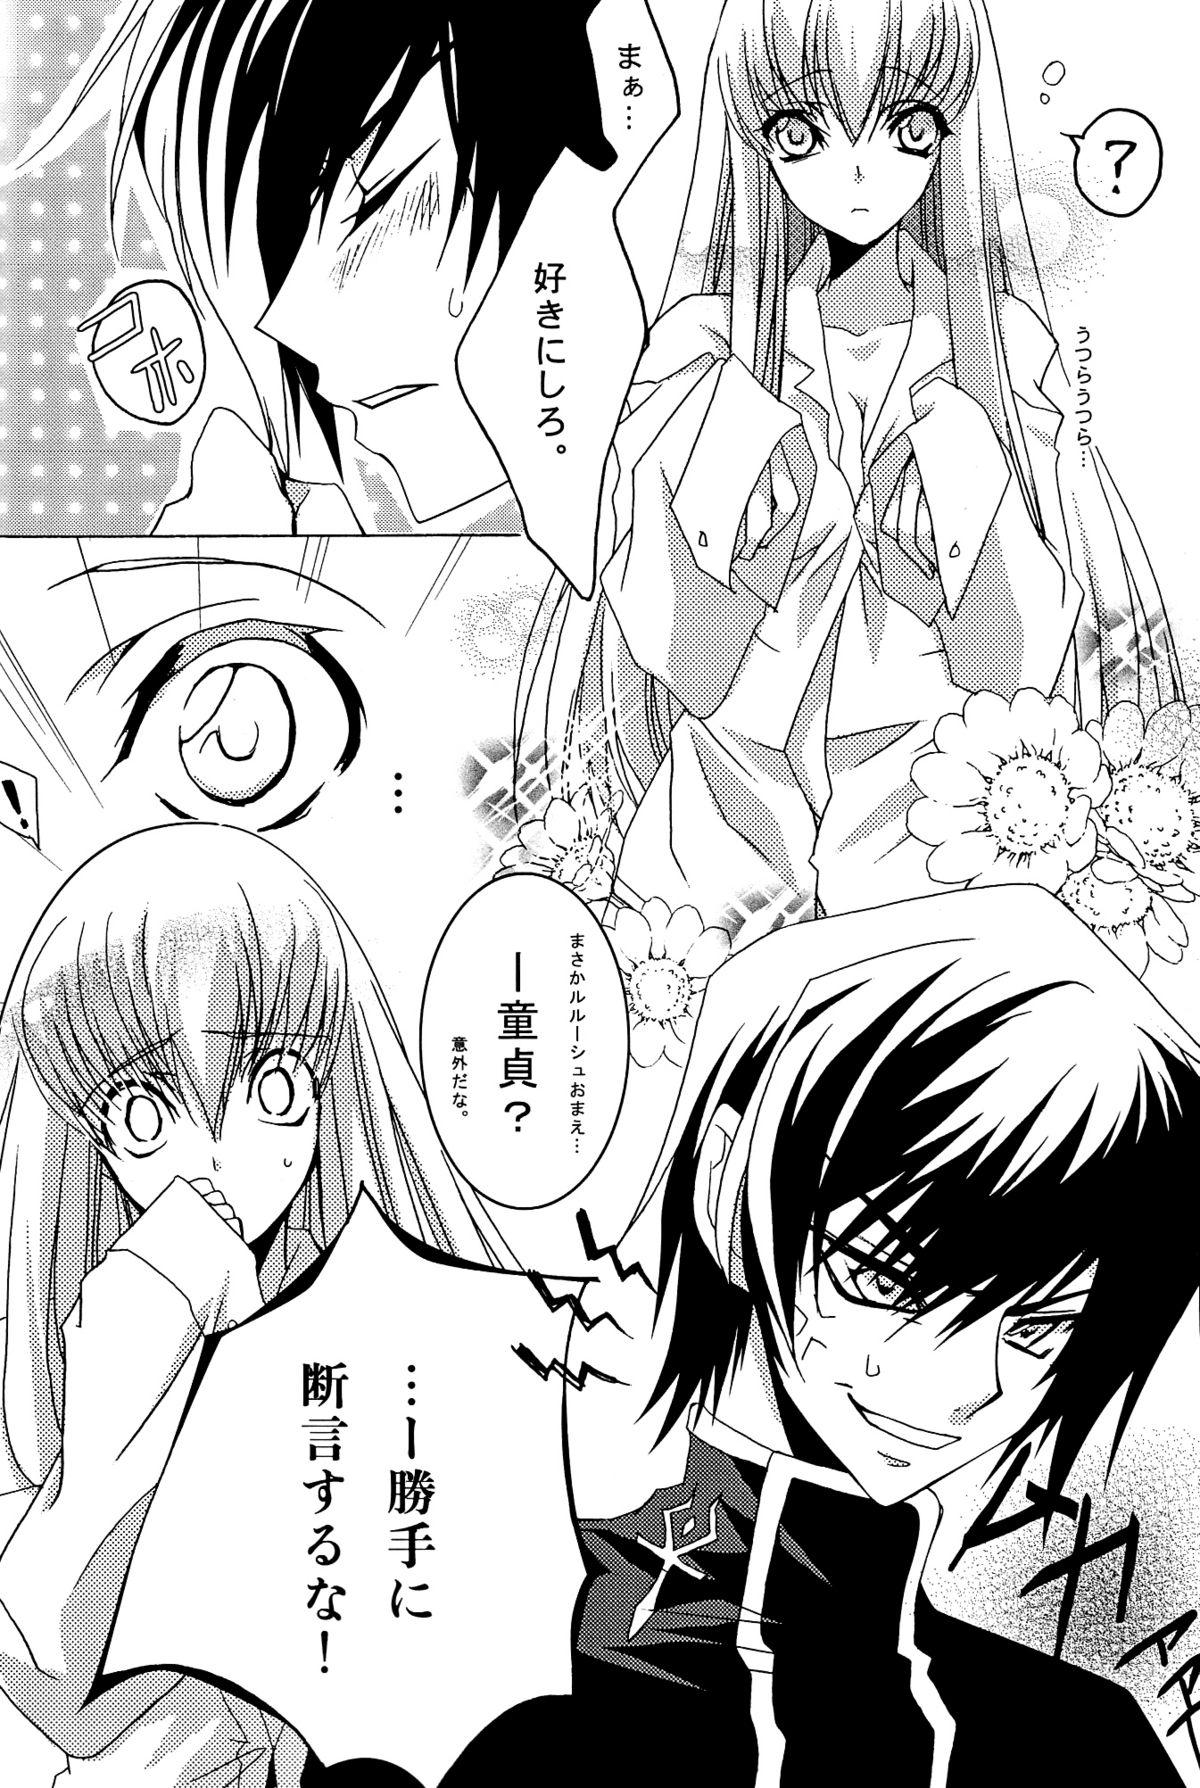 Hungarian Pink Noise - Code geass Exgf - Page 10